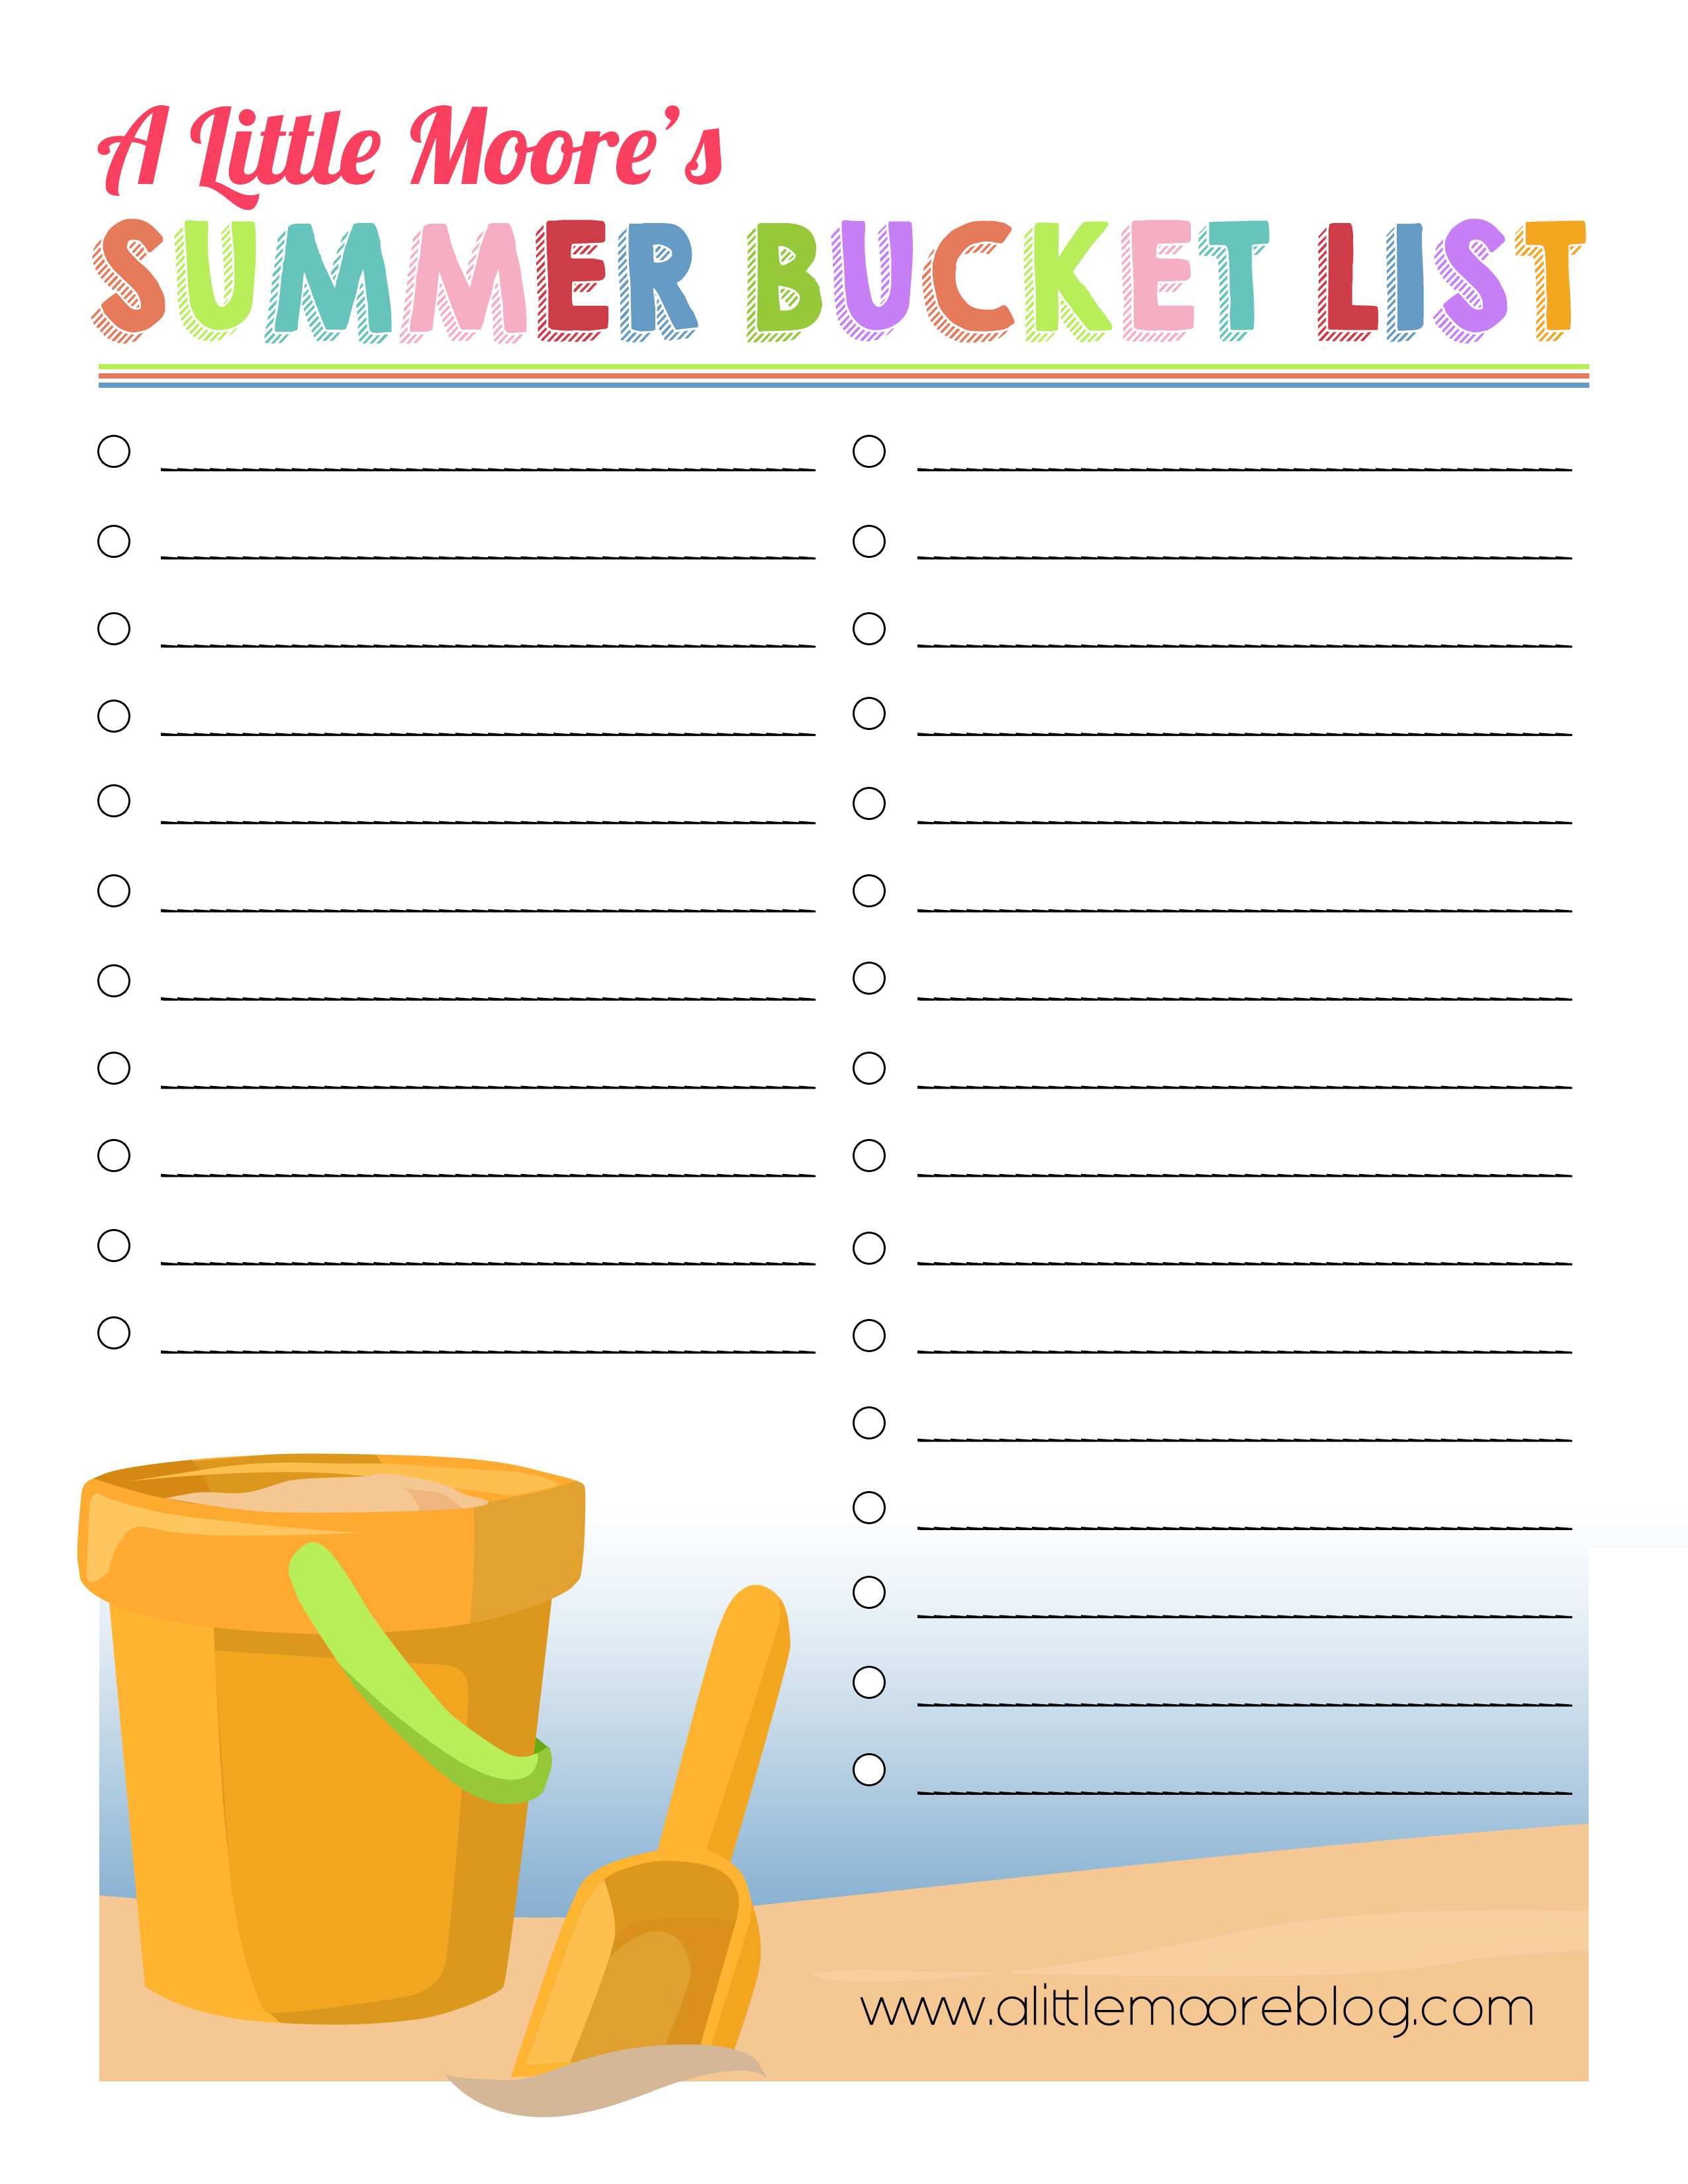 Create Your Own Summer Bucket List Printable A Little Moore